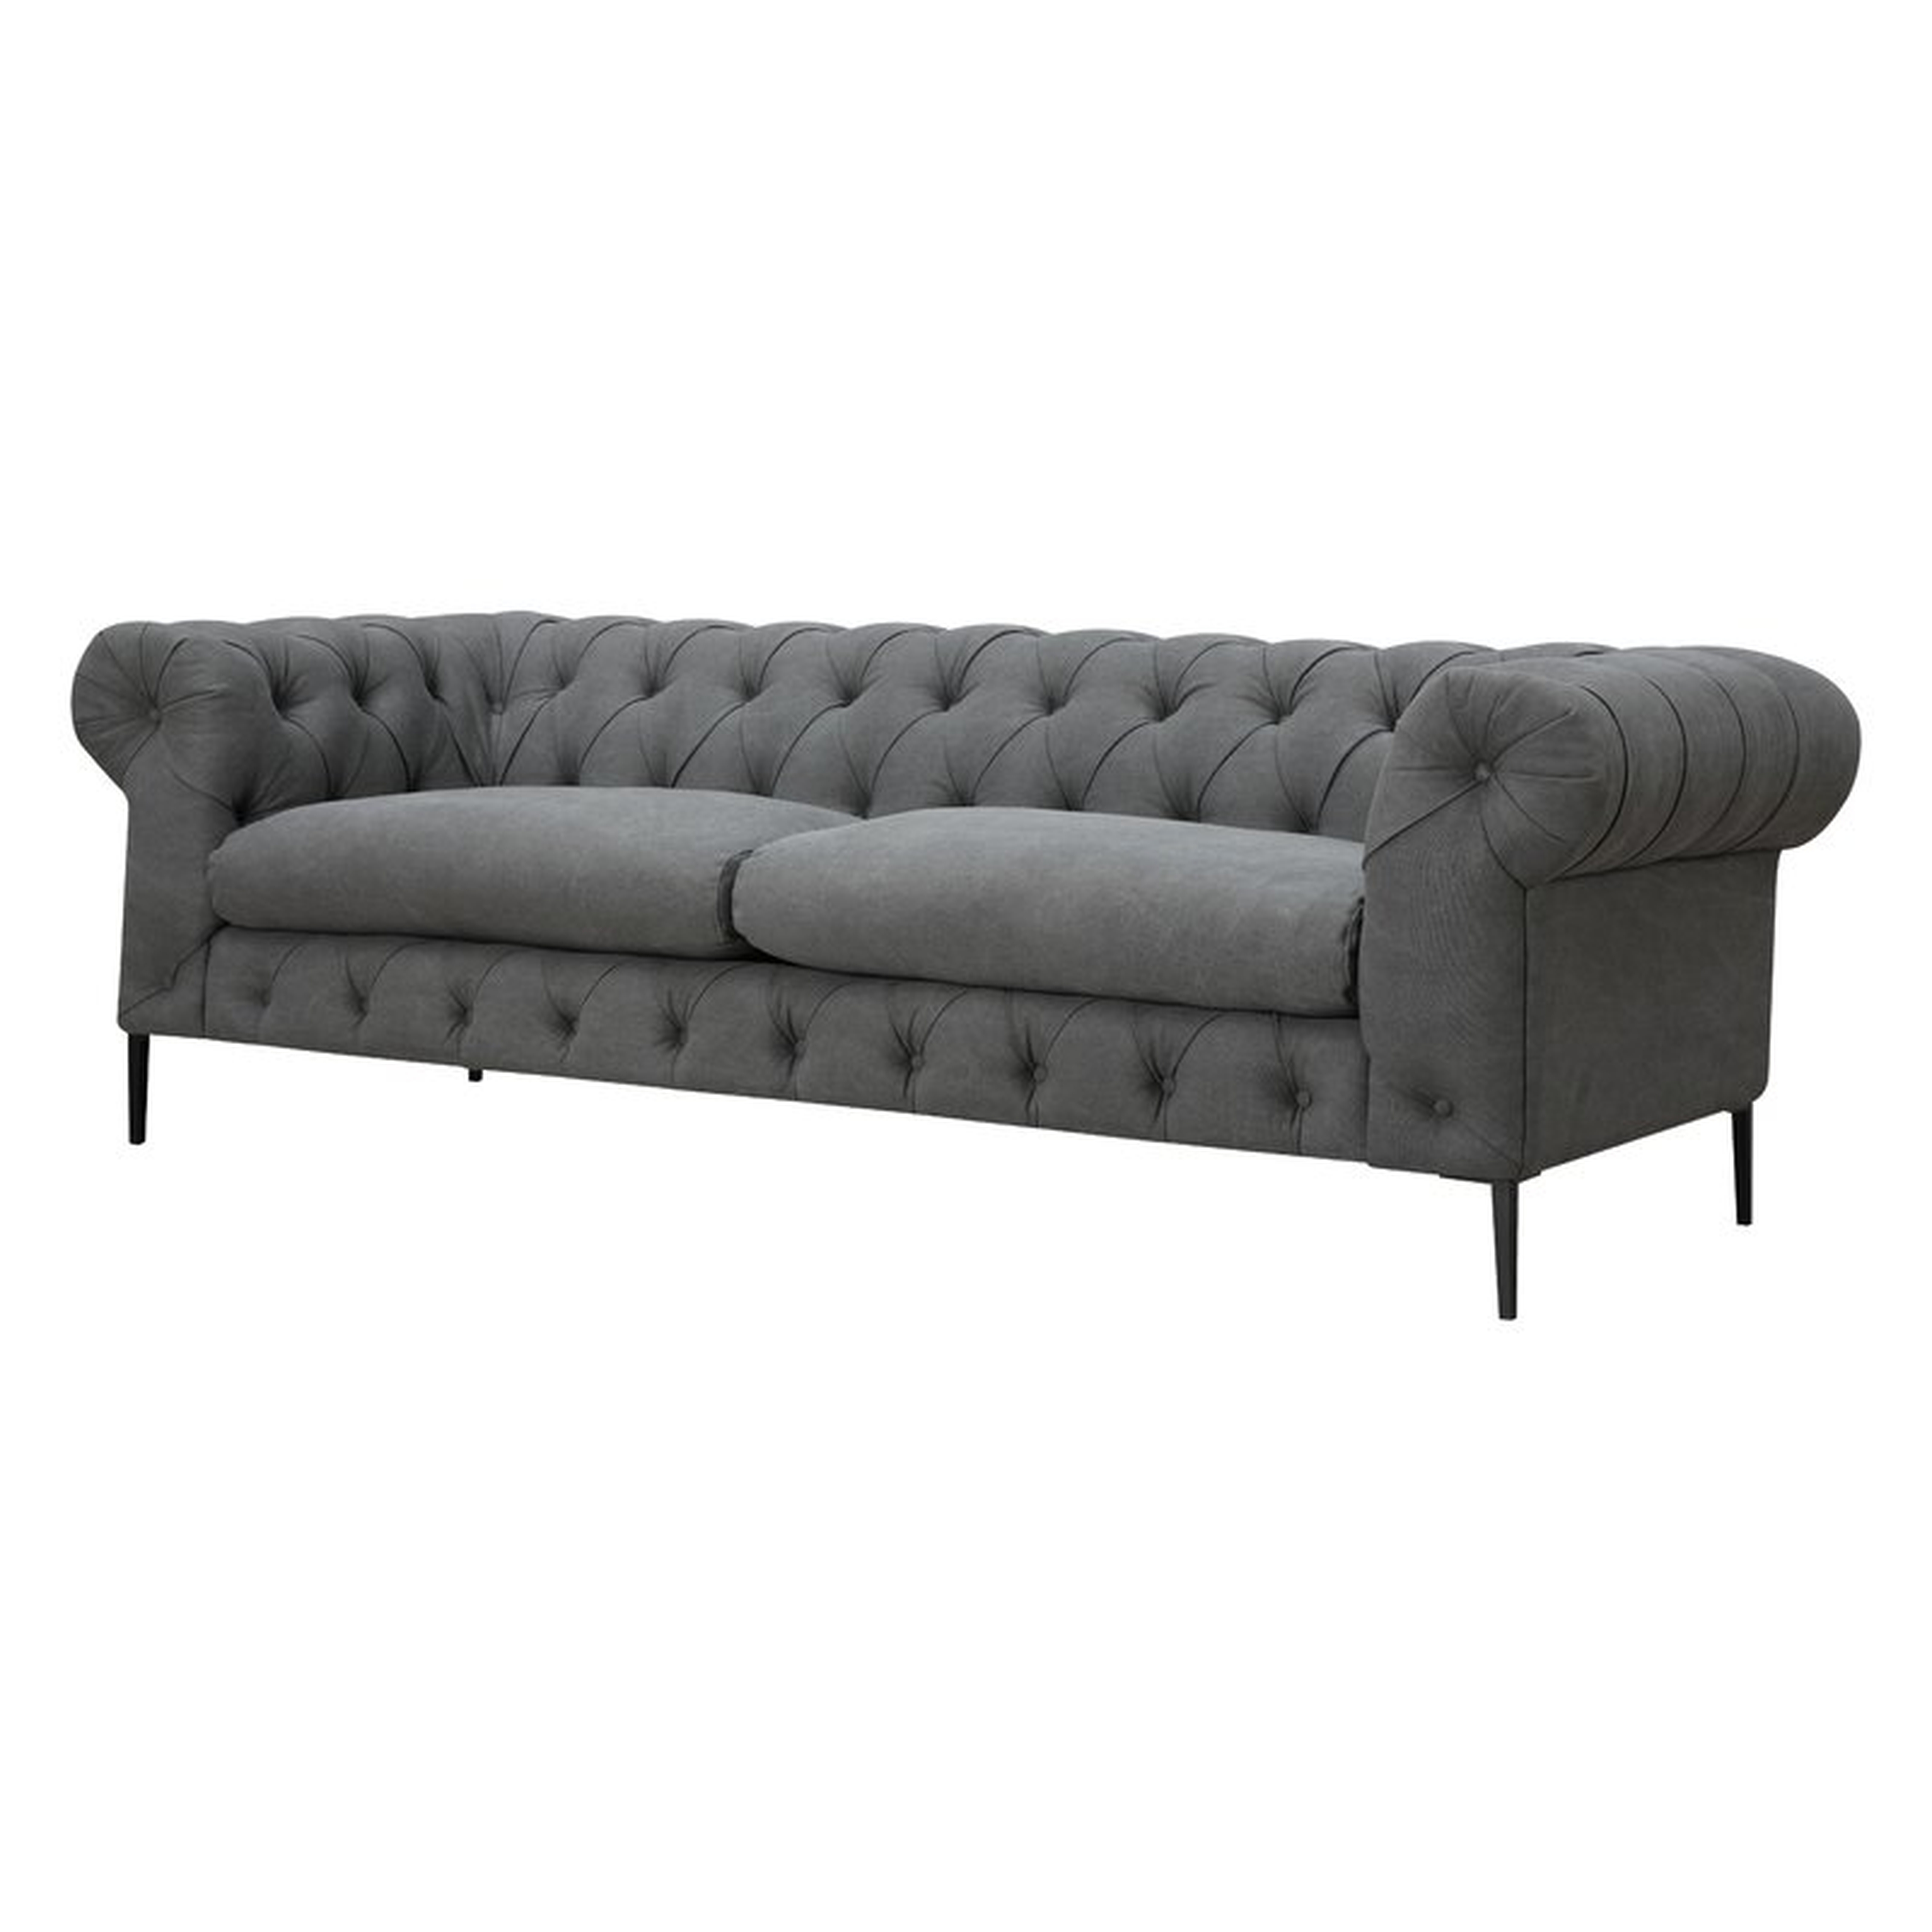 Canal Chesterfield Sofa Cotton Blend Fabric: Grey - Perigold